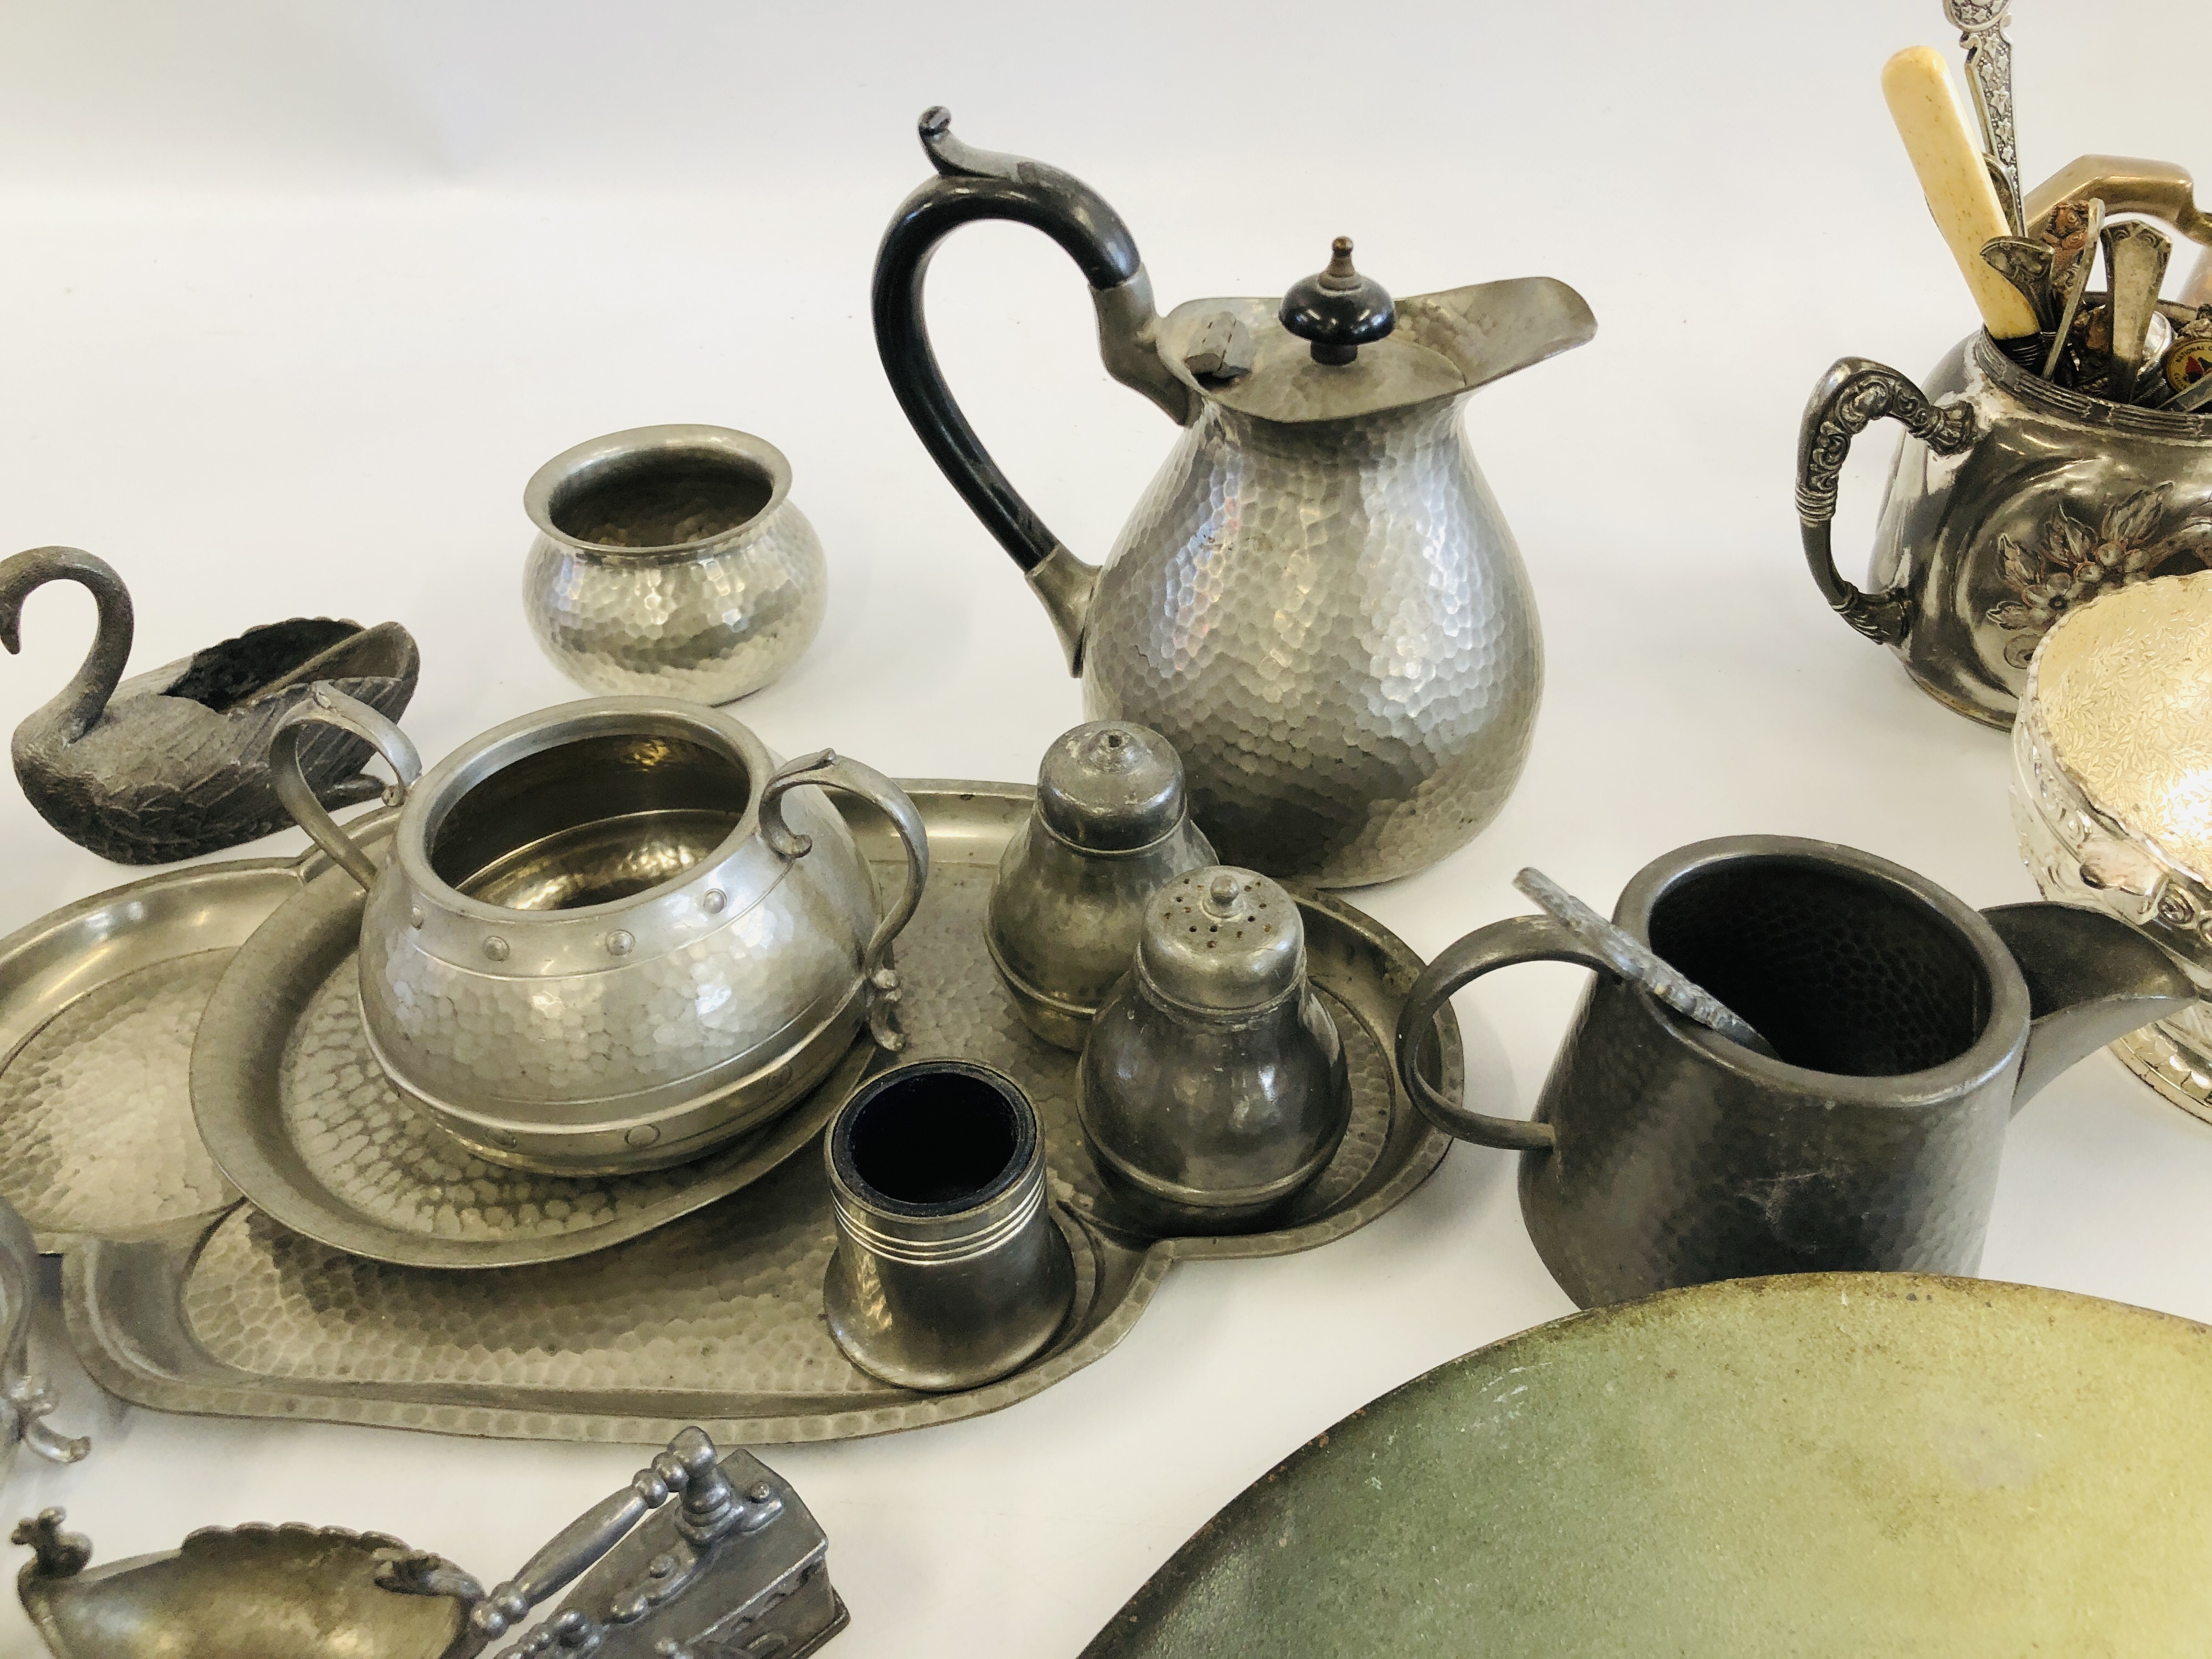 A BOX OF ASSORTED PLATED WARES ALONG WITH A BOX OF PEWTER WARES TO INCLUDE MINIATURE EXAMPLES. - Image 11 of 11